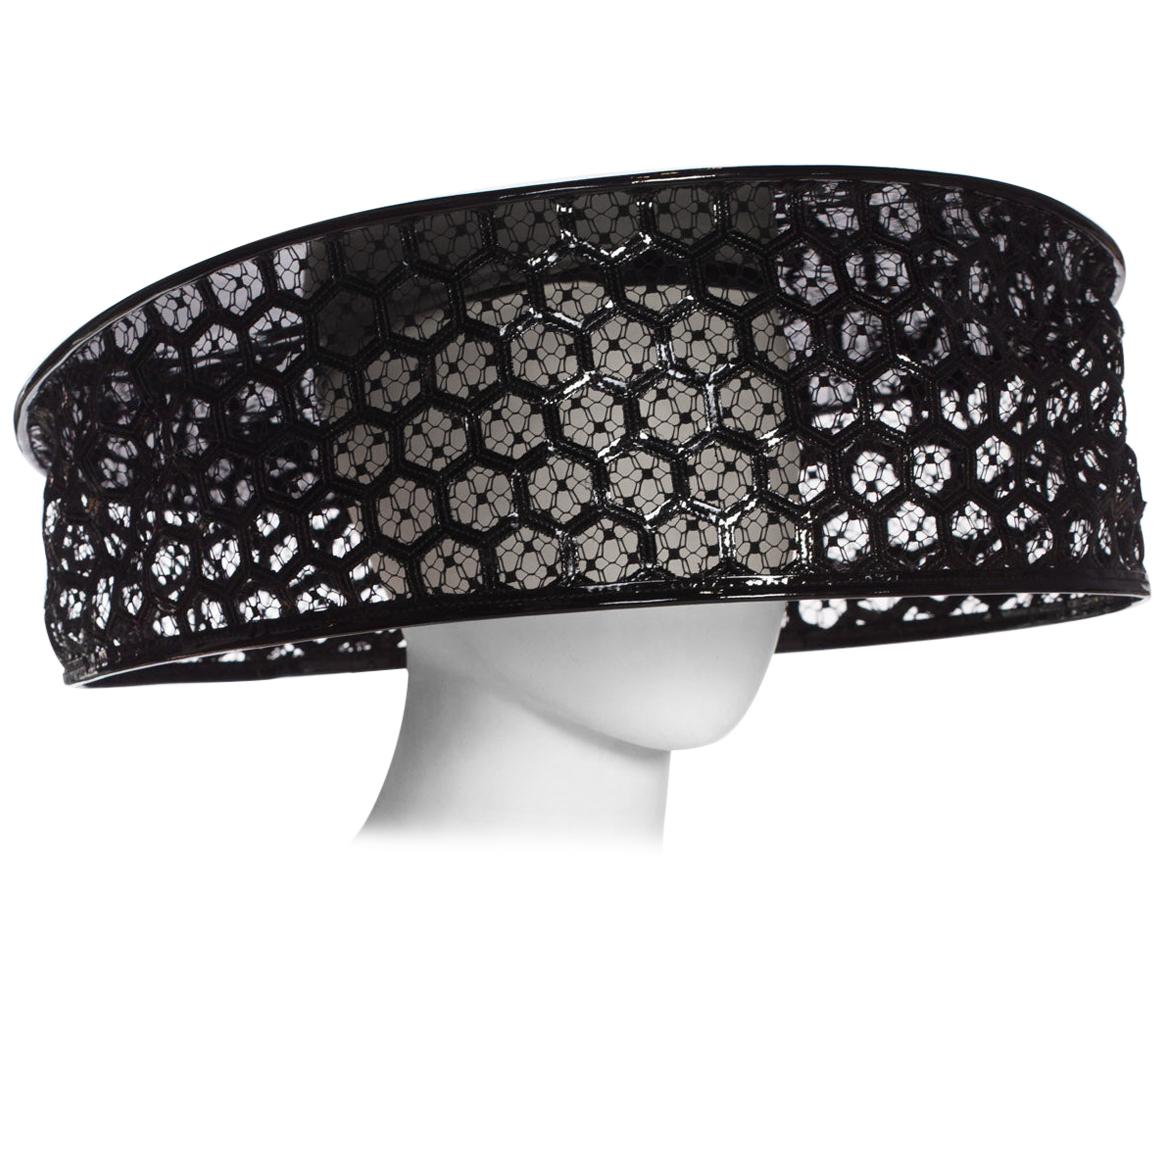 2013 Alexander McQueen Beekeeper Hat Black Patent Leather With 22 Circumference